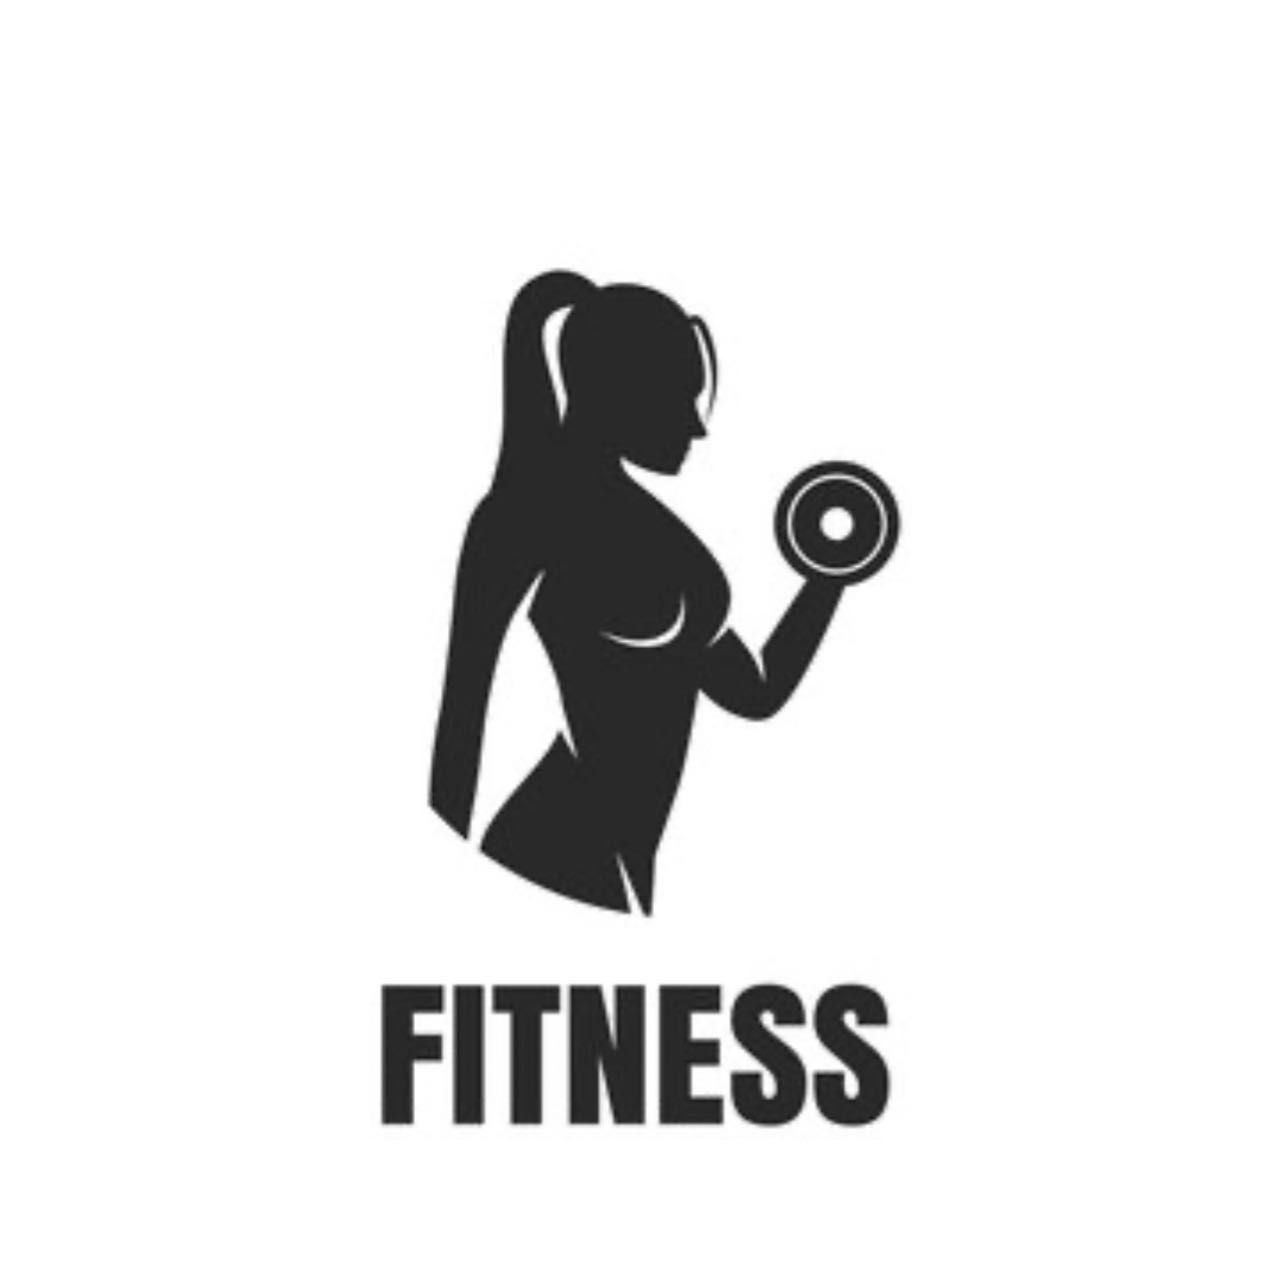 Fitness Consulting, 315 S Biscayne Blvd, Tampa, 33602